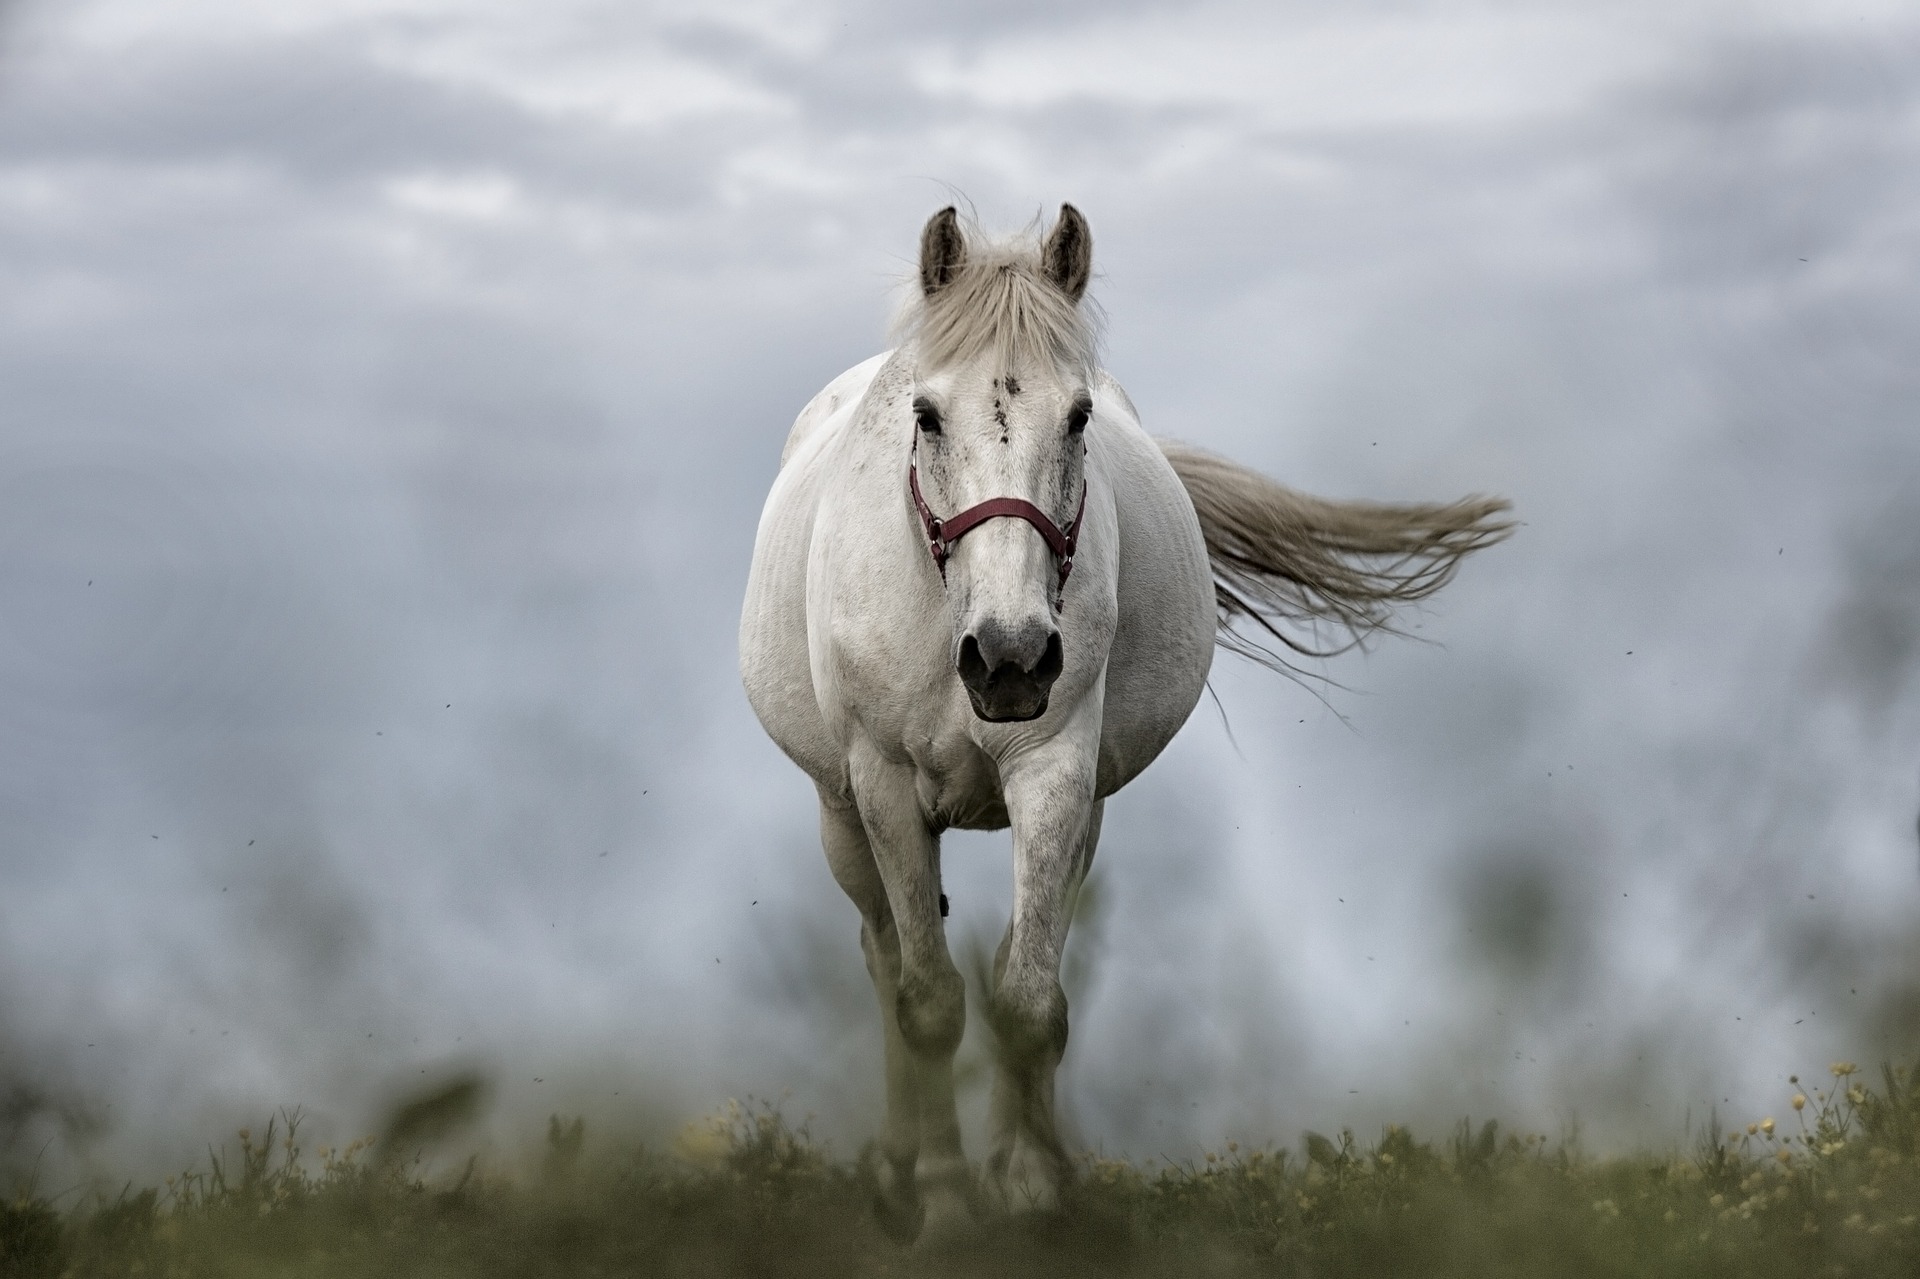 Equine herpes viral abortion is caused by equine herpesvirus-1 (EHV-1). Pregnant mares should be housed separately from other horses to ensure their protection.